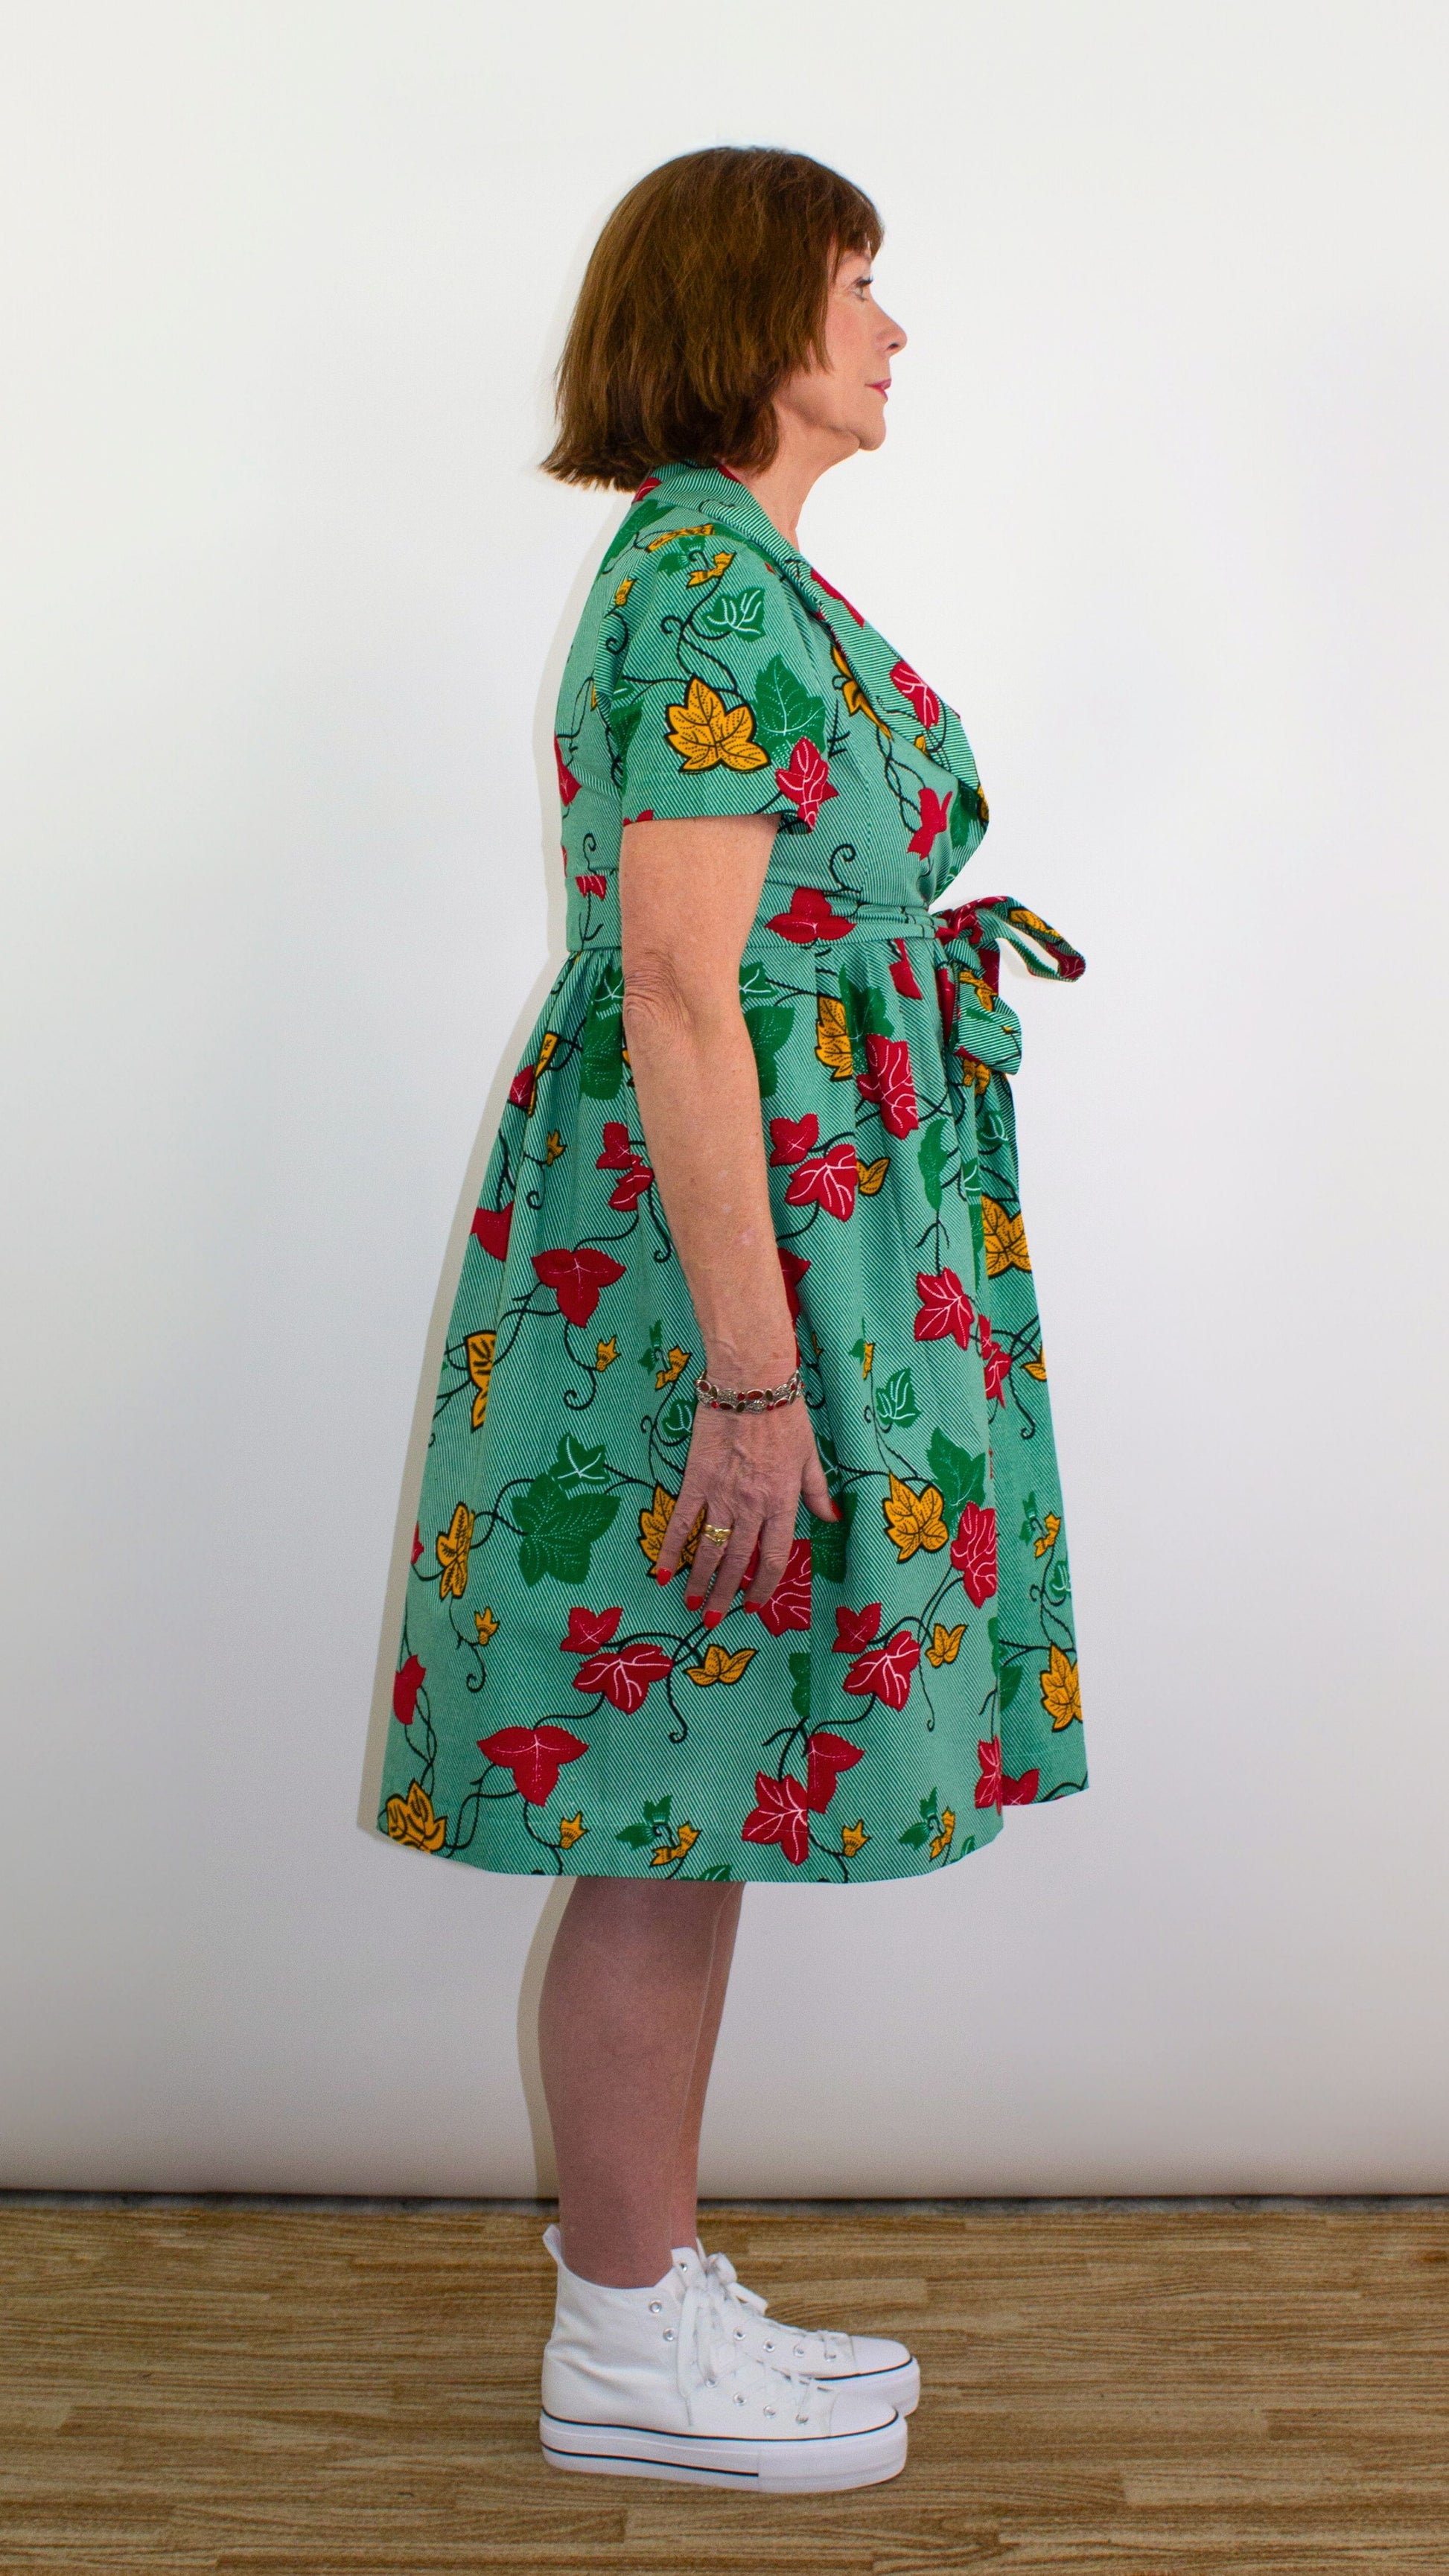 A side view of a model posing in a knee-length green print dress with leaf elements, highlighting the tie belt, tied into an elegant bow.